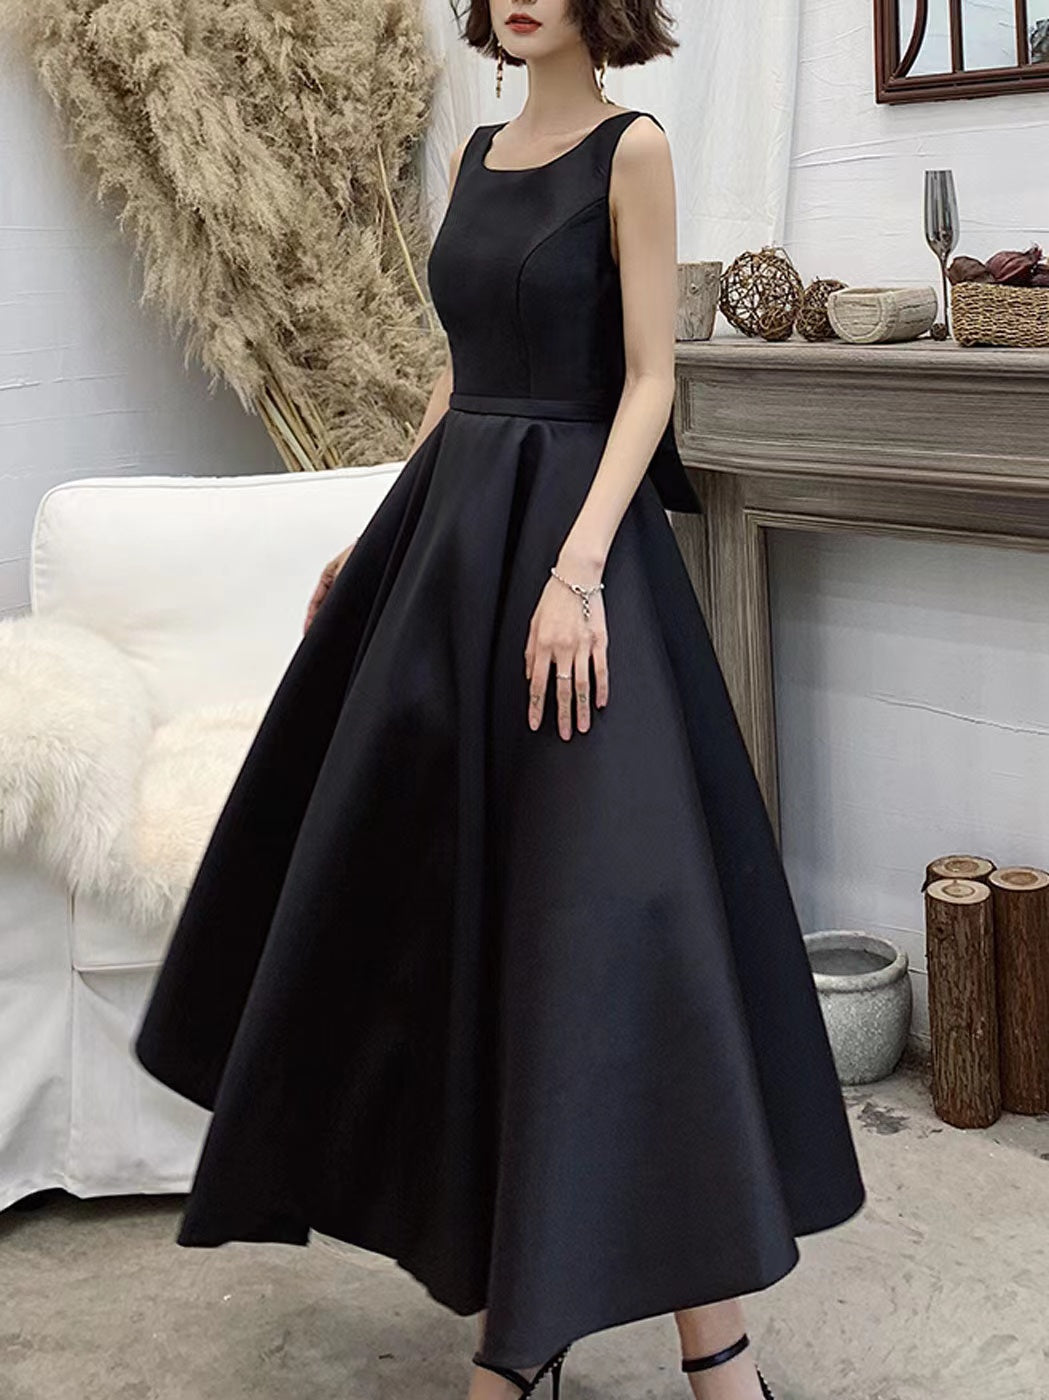 Black A-line Satin Prom Dresses, Simple Girl Normal Dresses, 2022 Newest Party Dresses